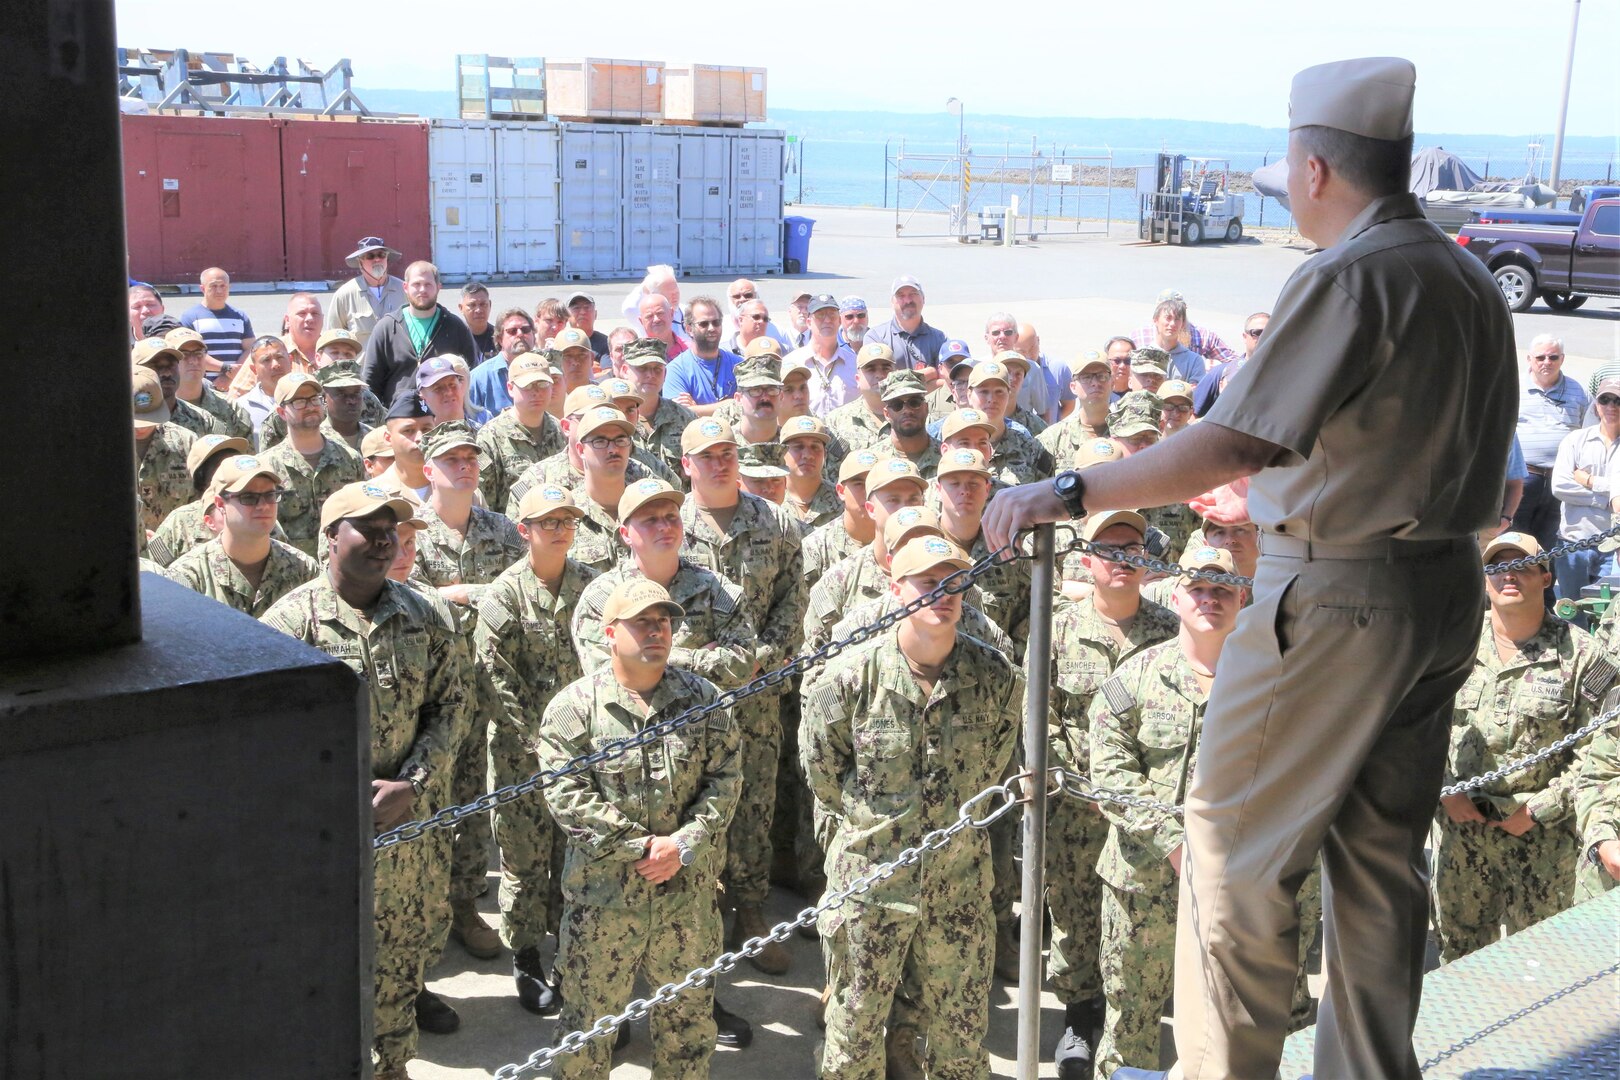 Rear Adm. Tom Anderson speaks to Sailors and civilians at Puget Sound Naval Shipyard & Intermediate Maintenance Facility Everett Detachment during an all-hands presentation in Everett, Washington. Anderson is Commander, Navy Regional Maintenance Center and Naval Sea Systems Deputy Commander, Ship Maintenance and Modernization and visited Northwest Regional Maintenance Center on Jul 22.